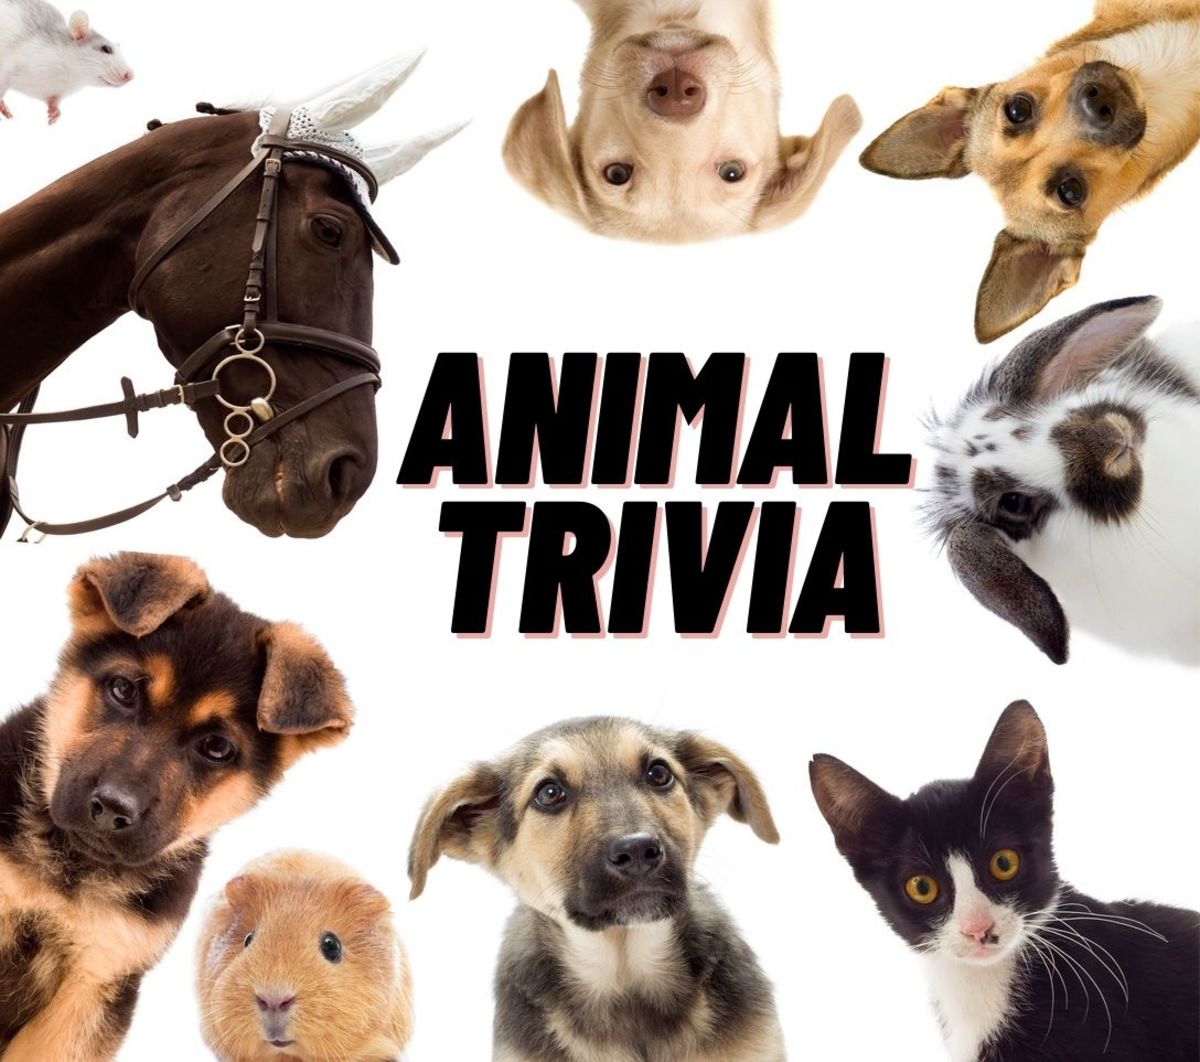 100 Animal Trivia Questions (with Answers!) For Kids & Adults - Parade Pets